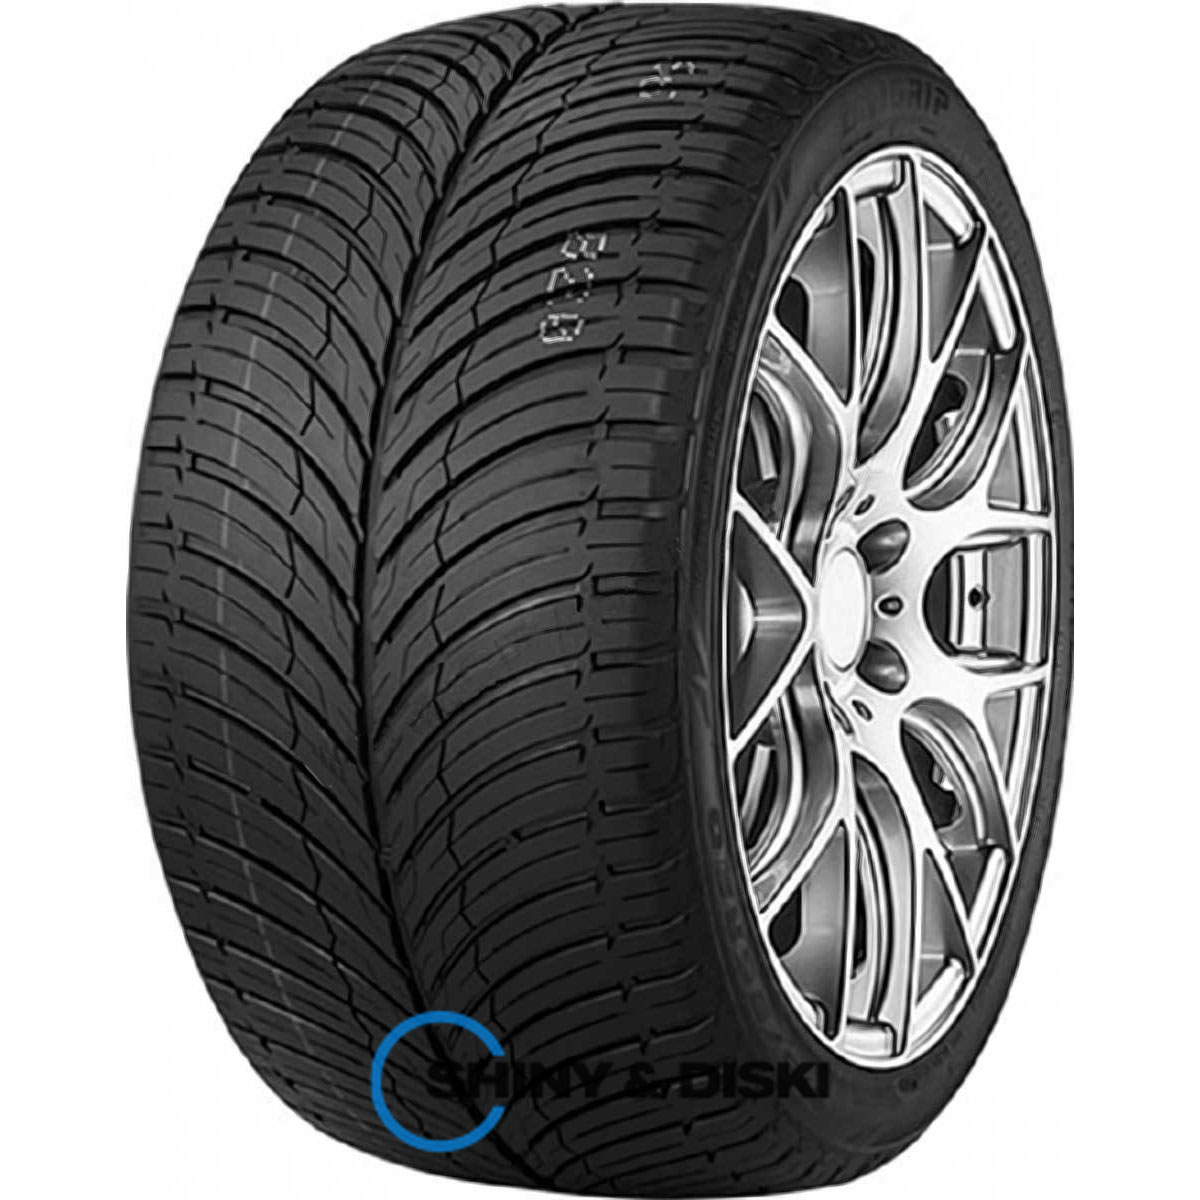 unigrip lateral force 4s 235/60 r17 102v